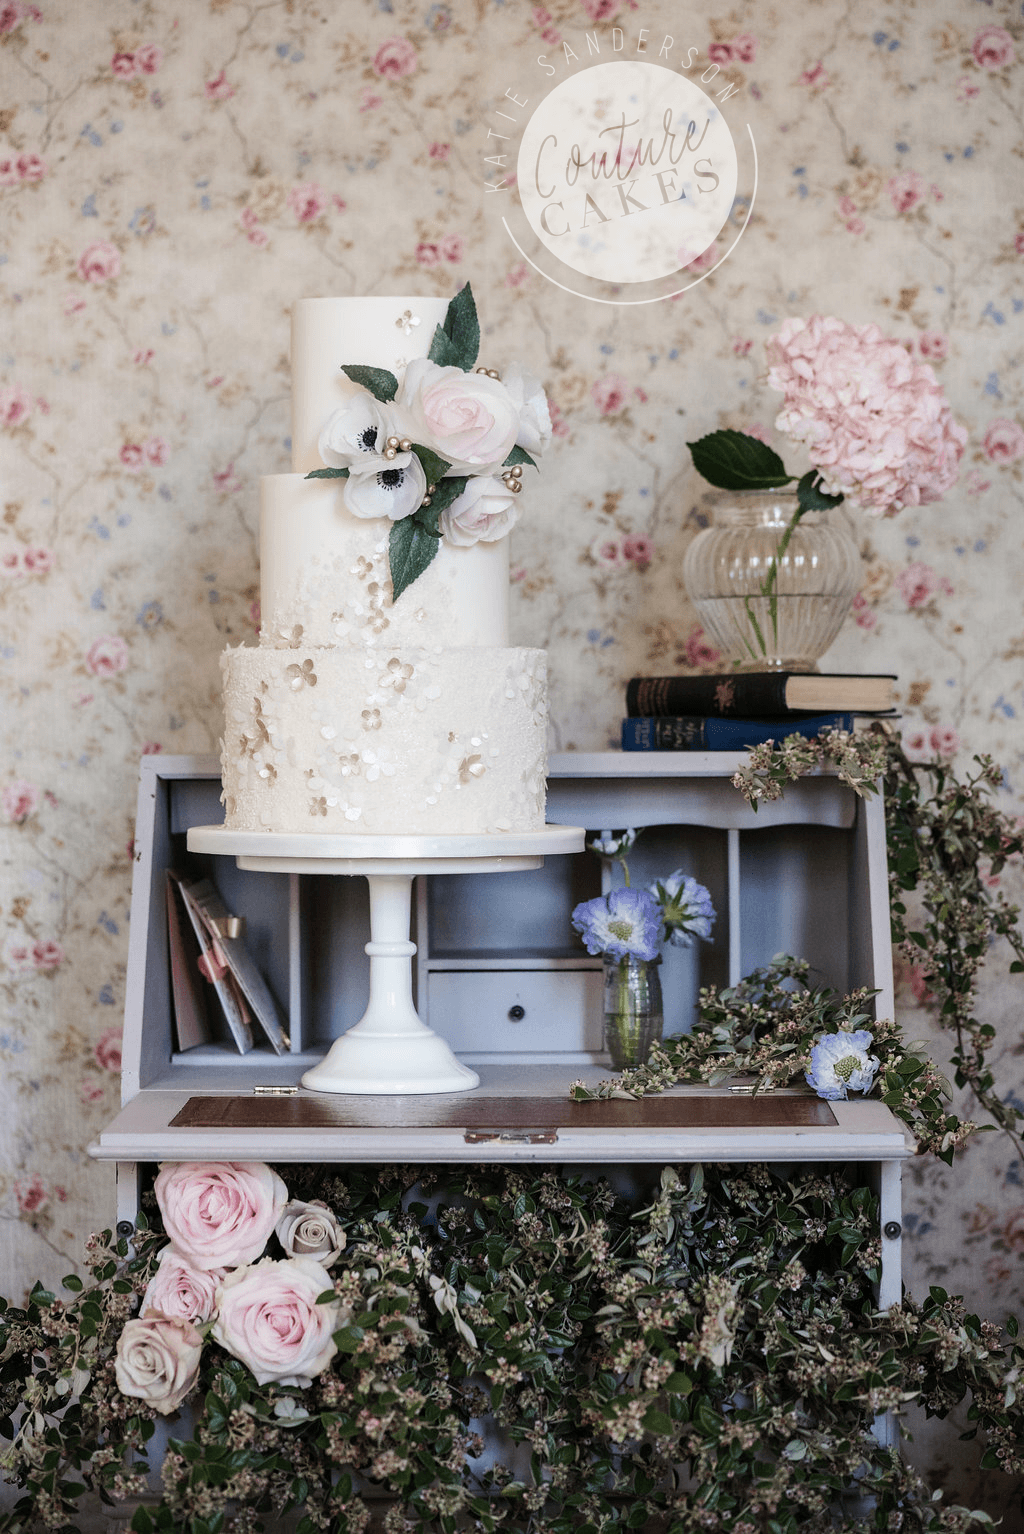 Ethereal Romance Wedding Cake: Serves 100 portions, Price category D £649